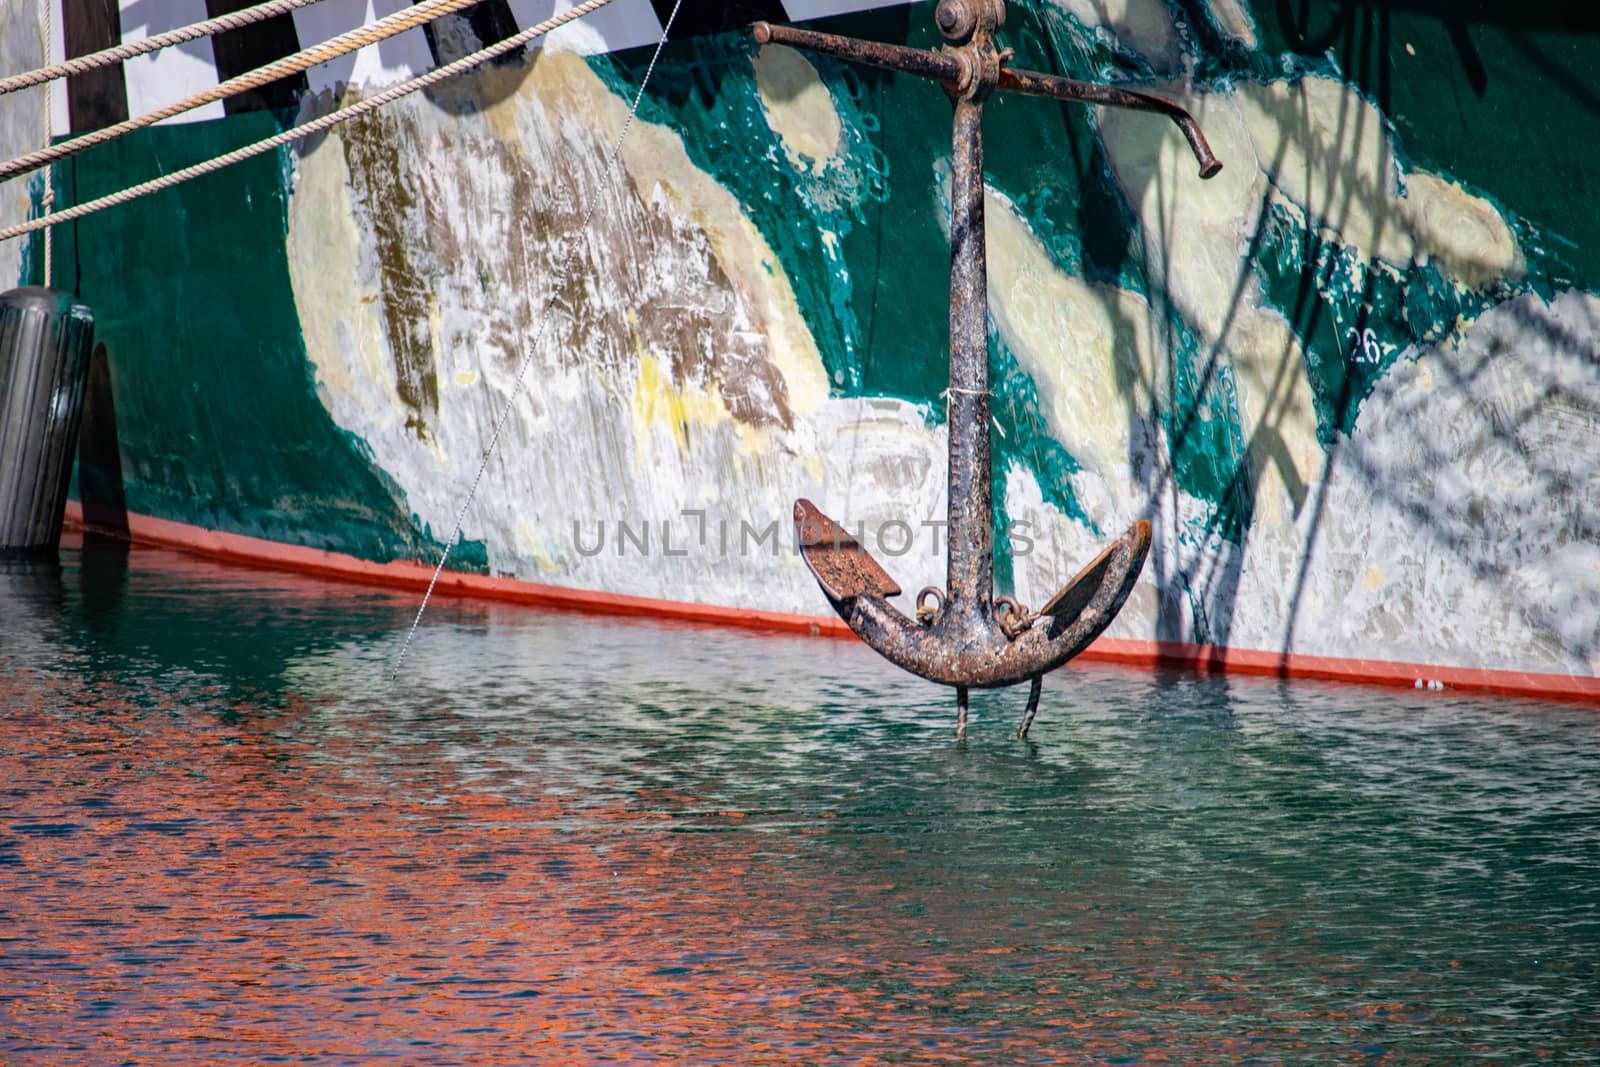 The anchor of a grungy boat is seen hanging above rippling water before the boat's hull.